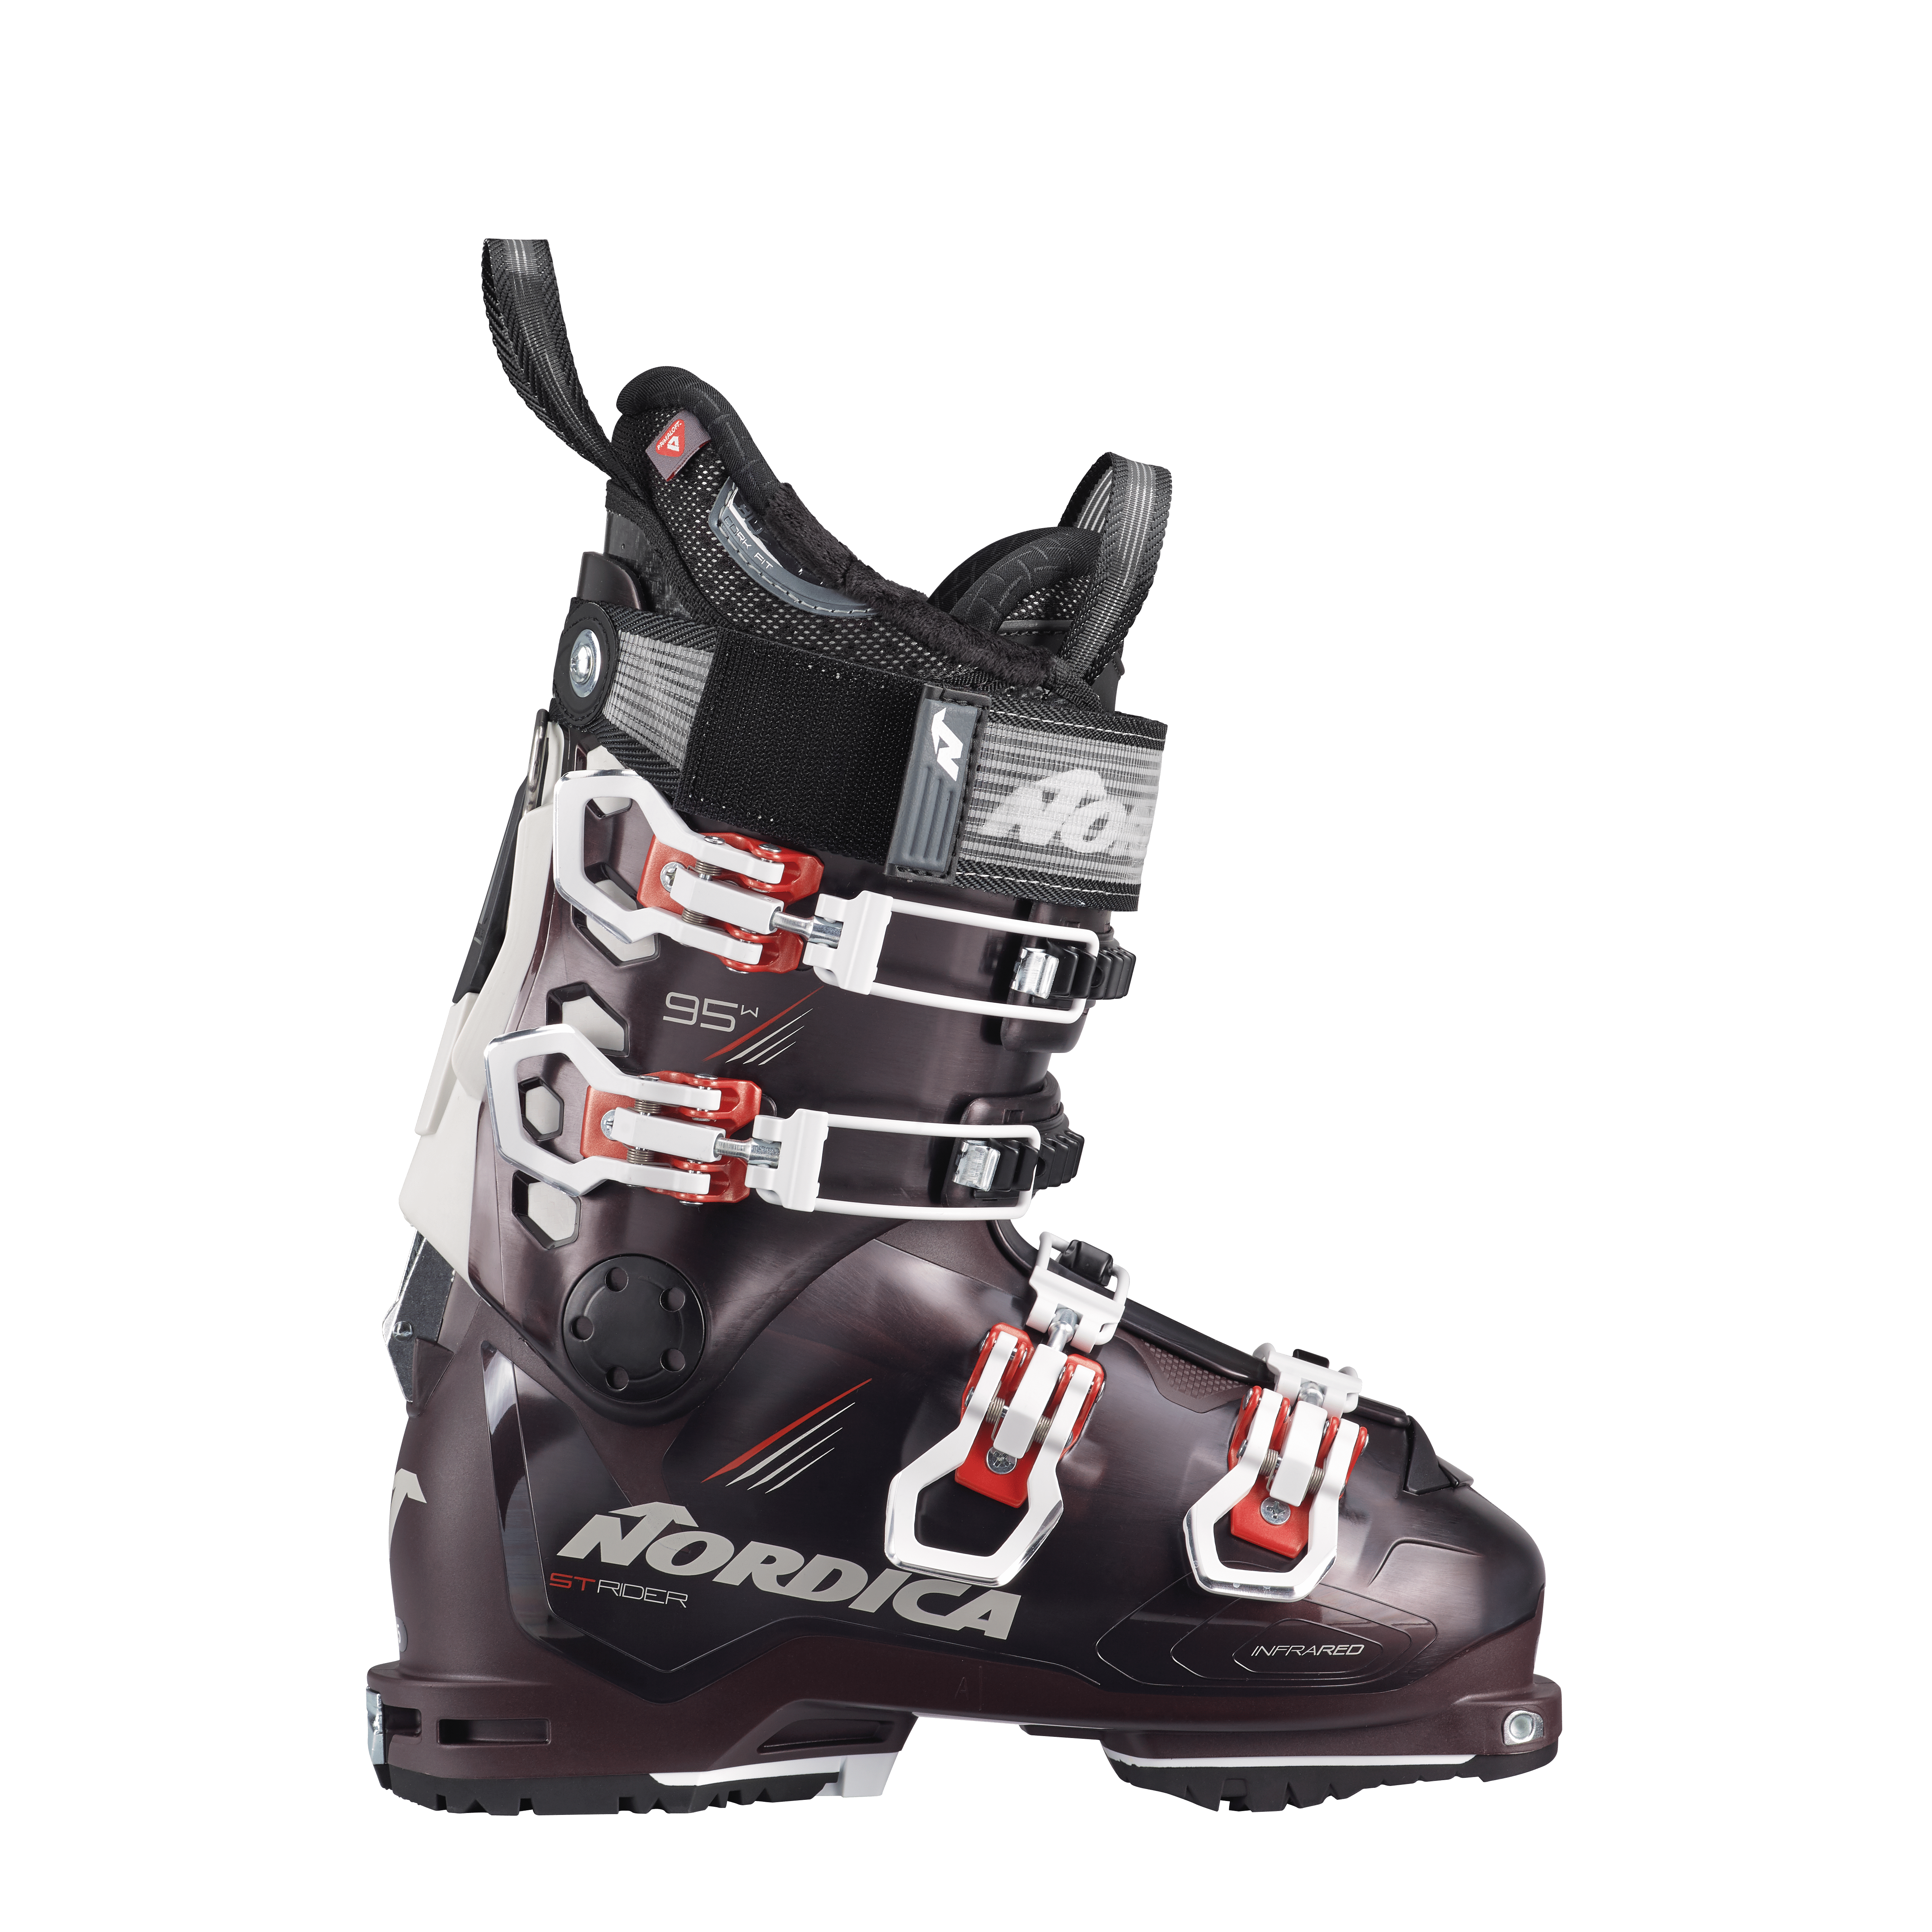 BOOTS Nordica - Skis and Boots website